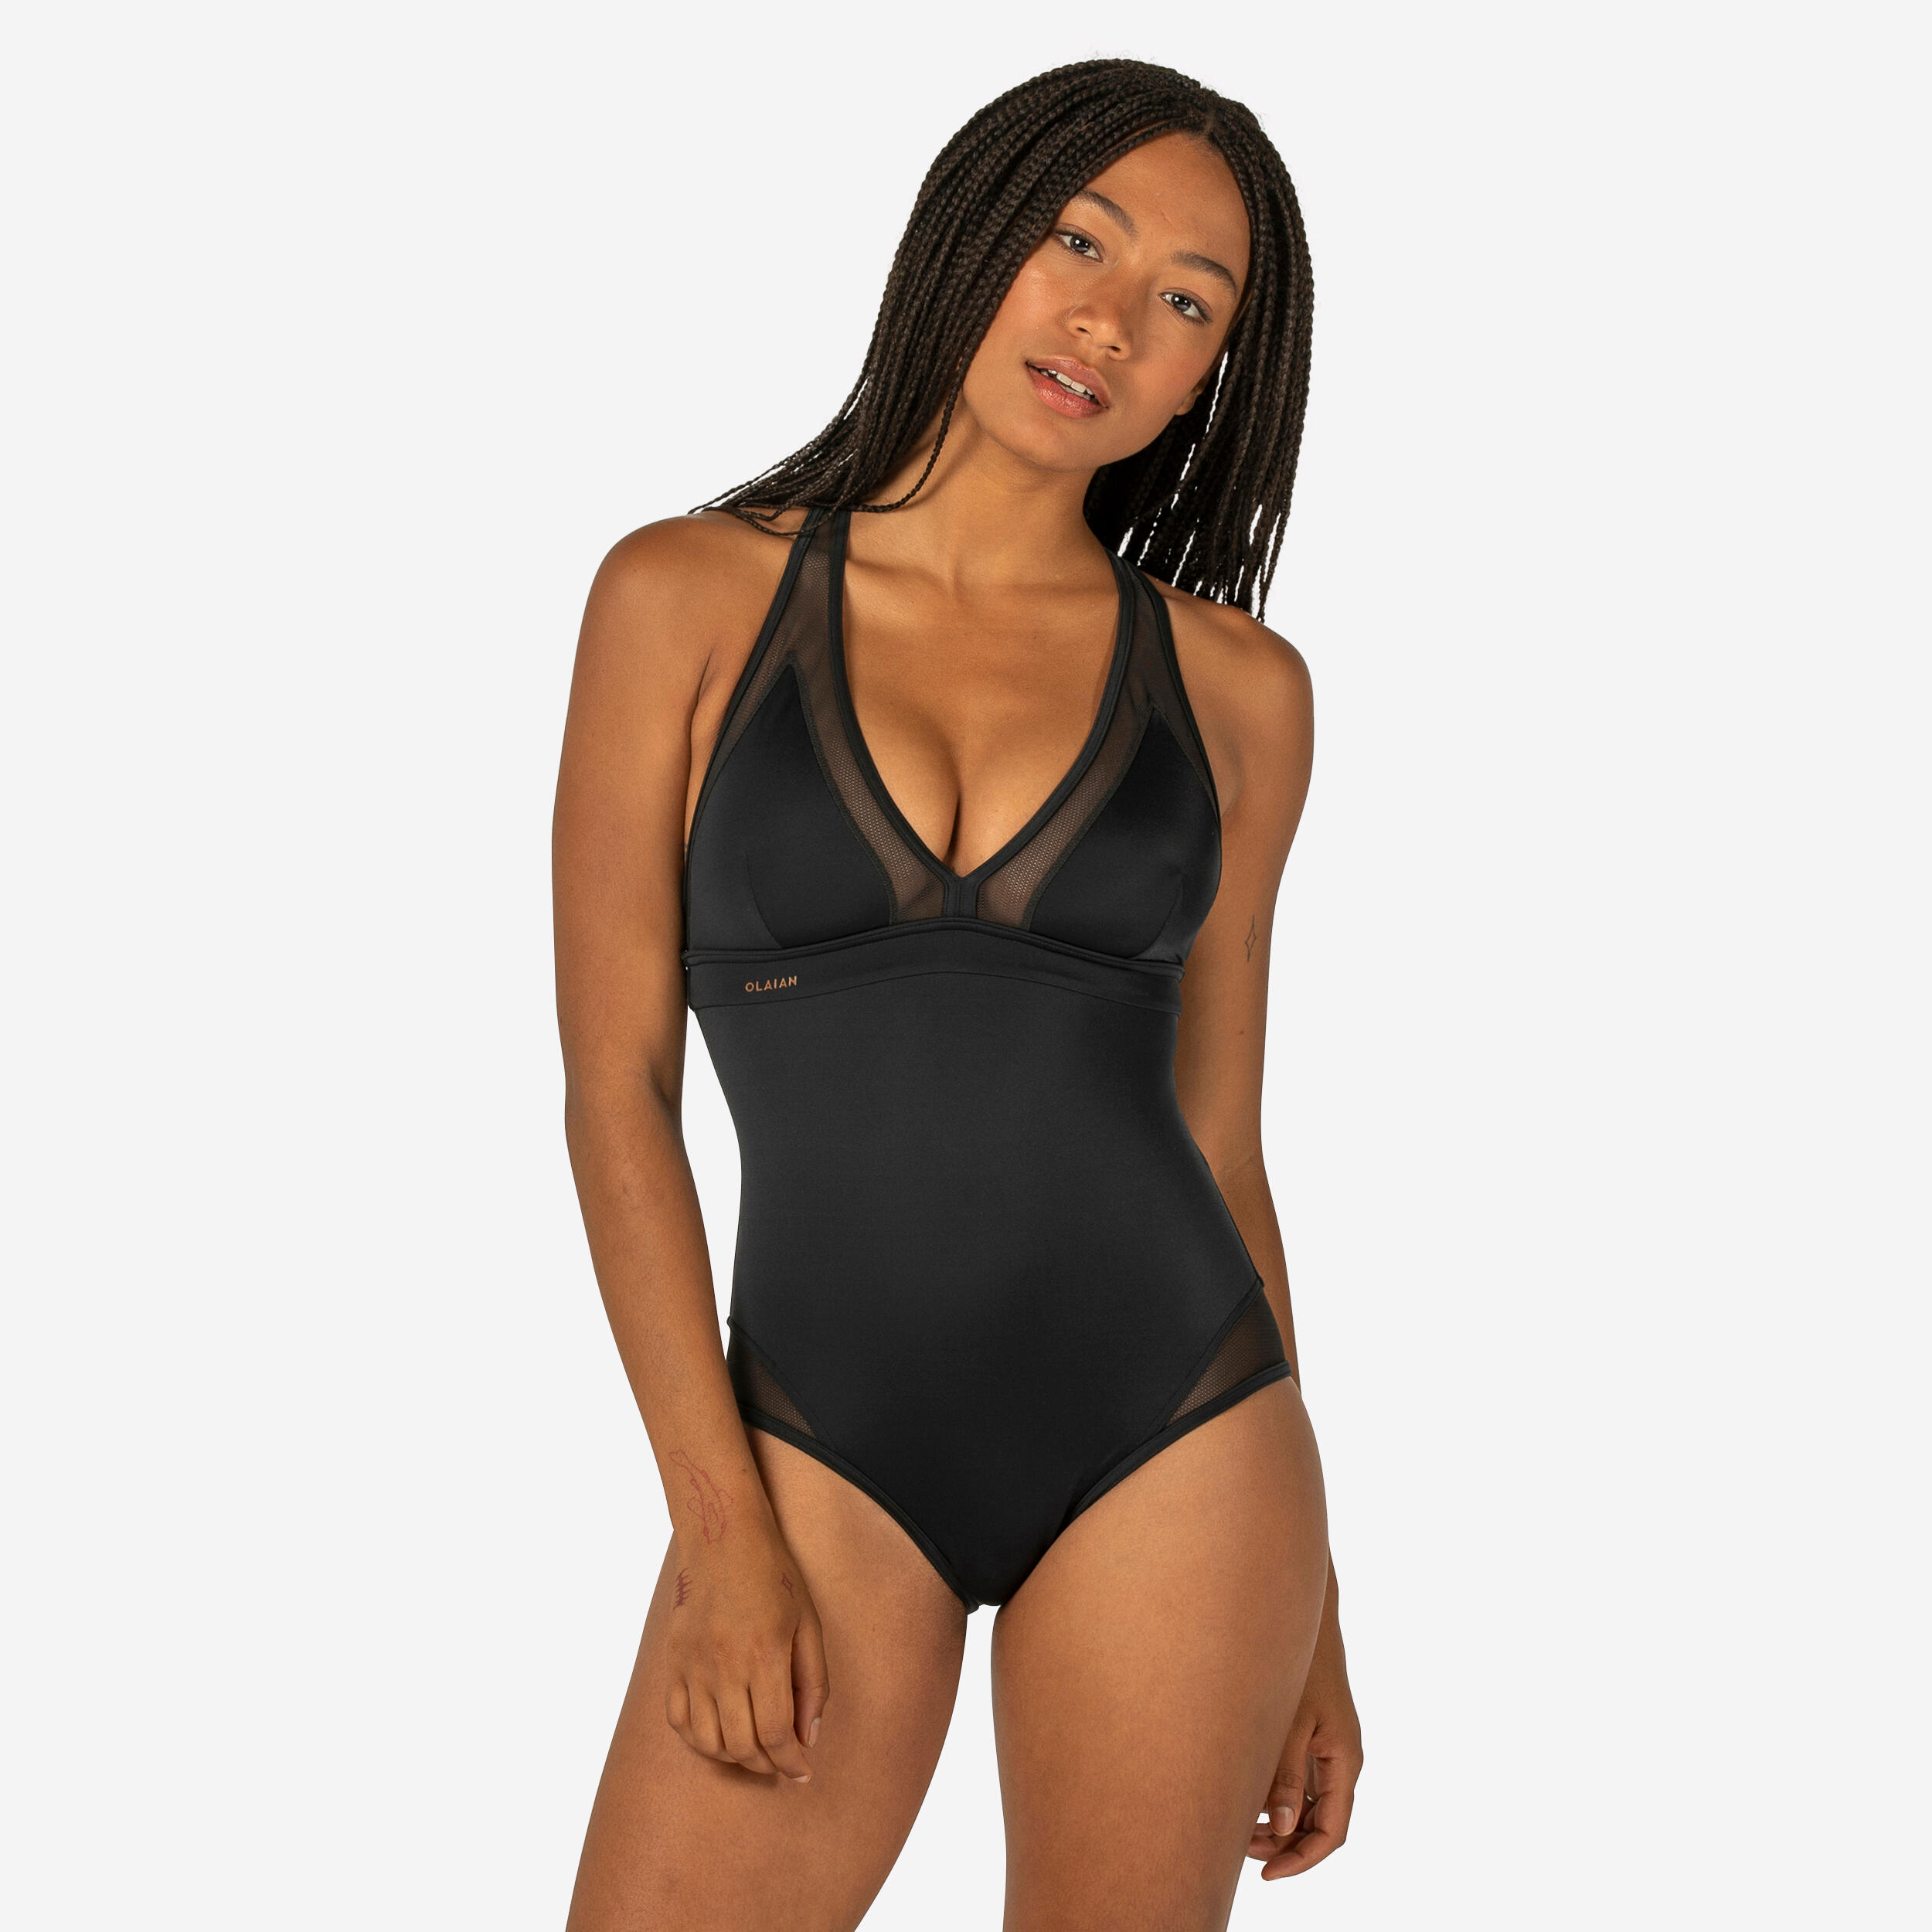 WOMEN'S SURFING SWIMSUIT WITH X BACK ISA 1/15